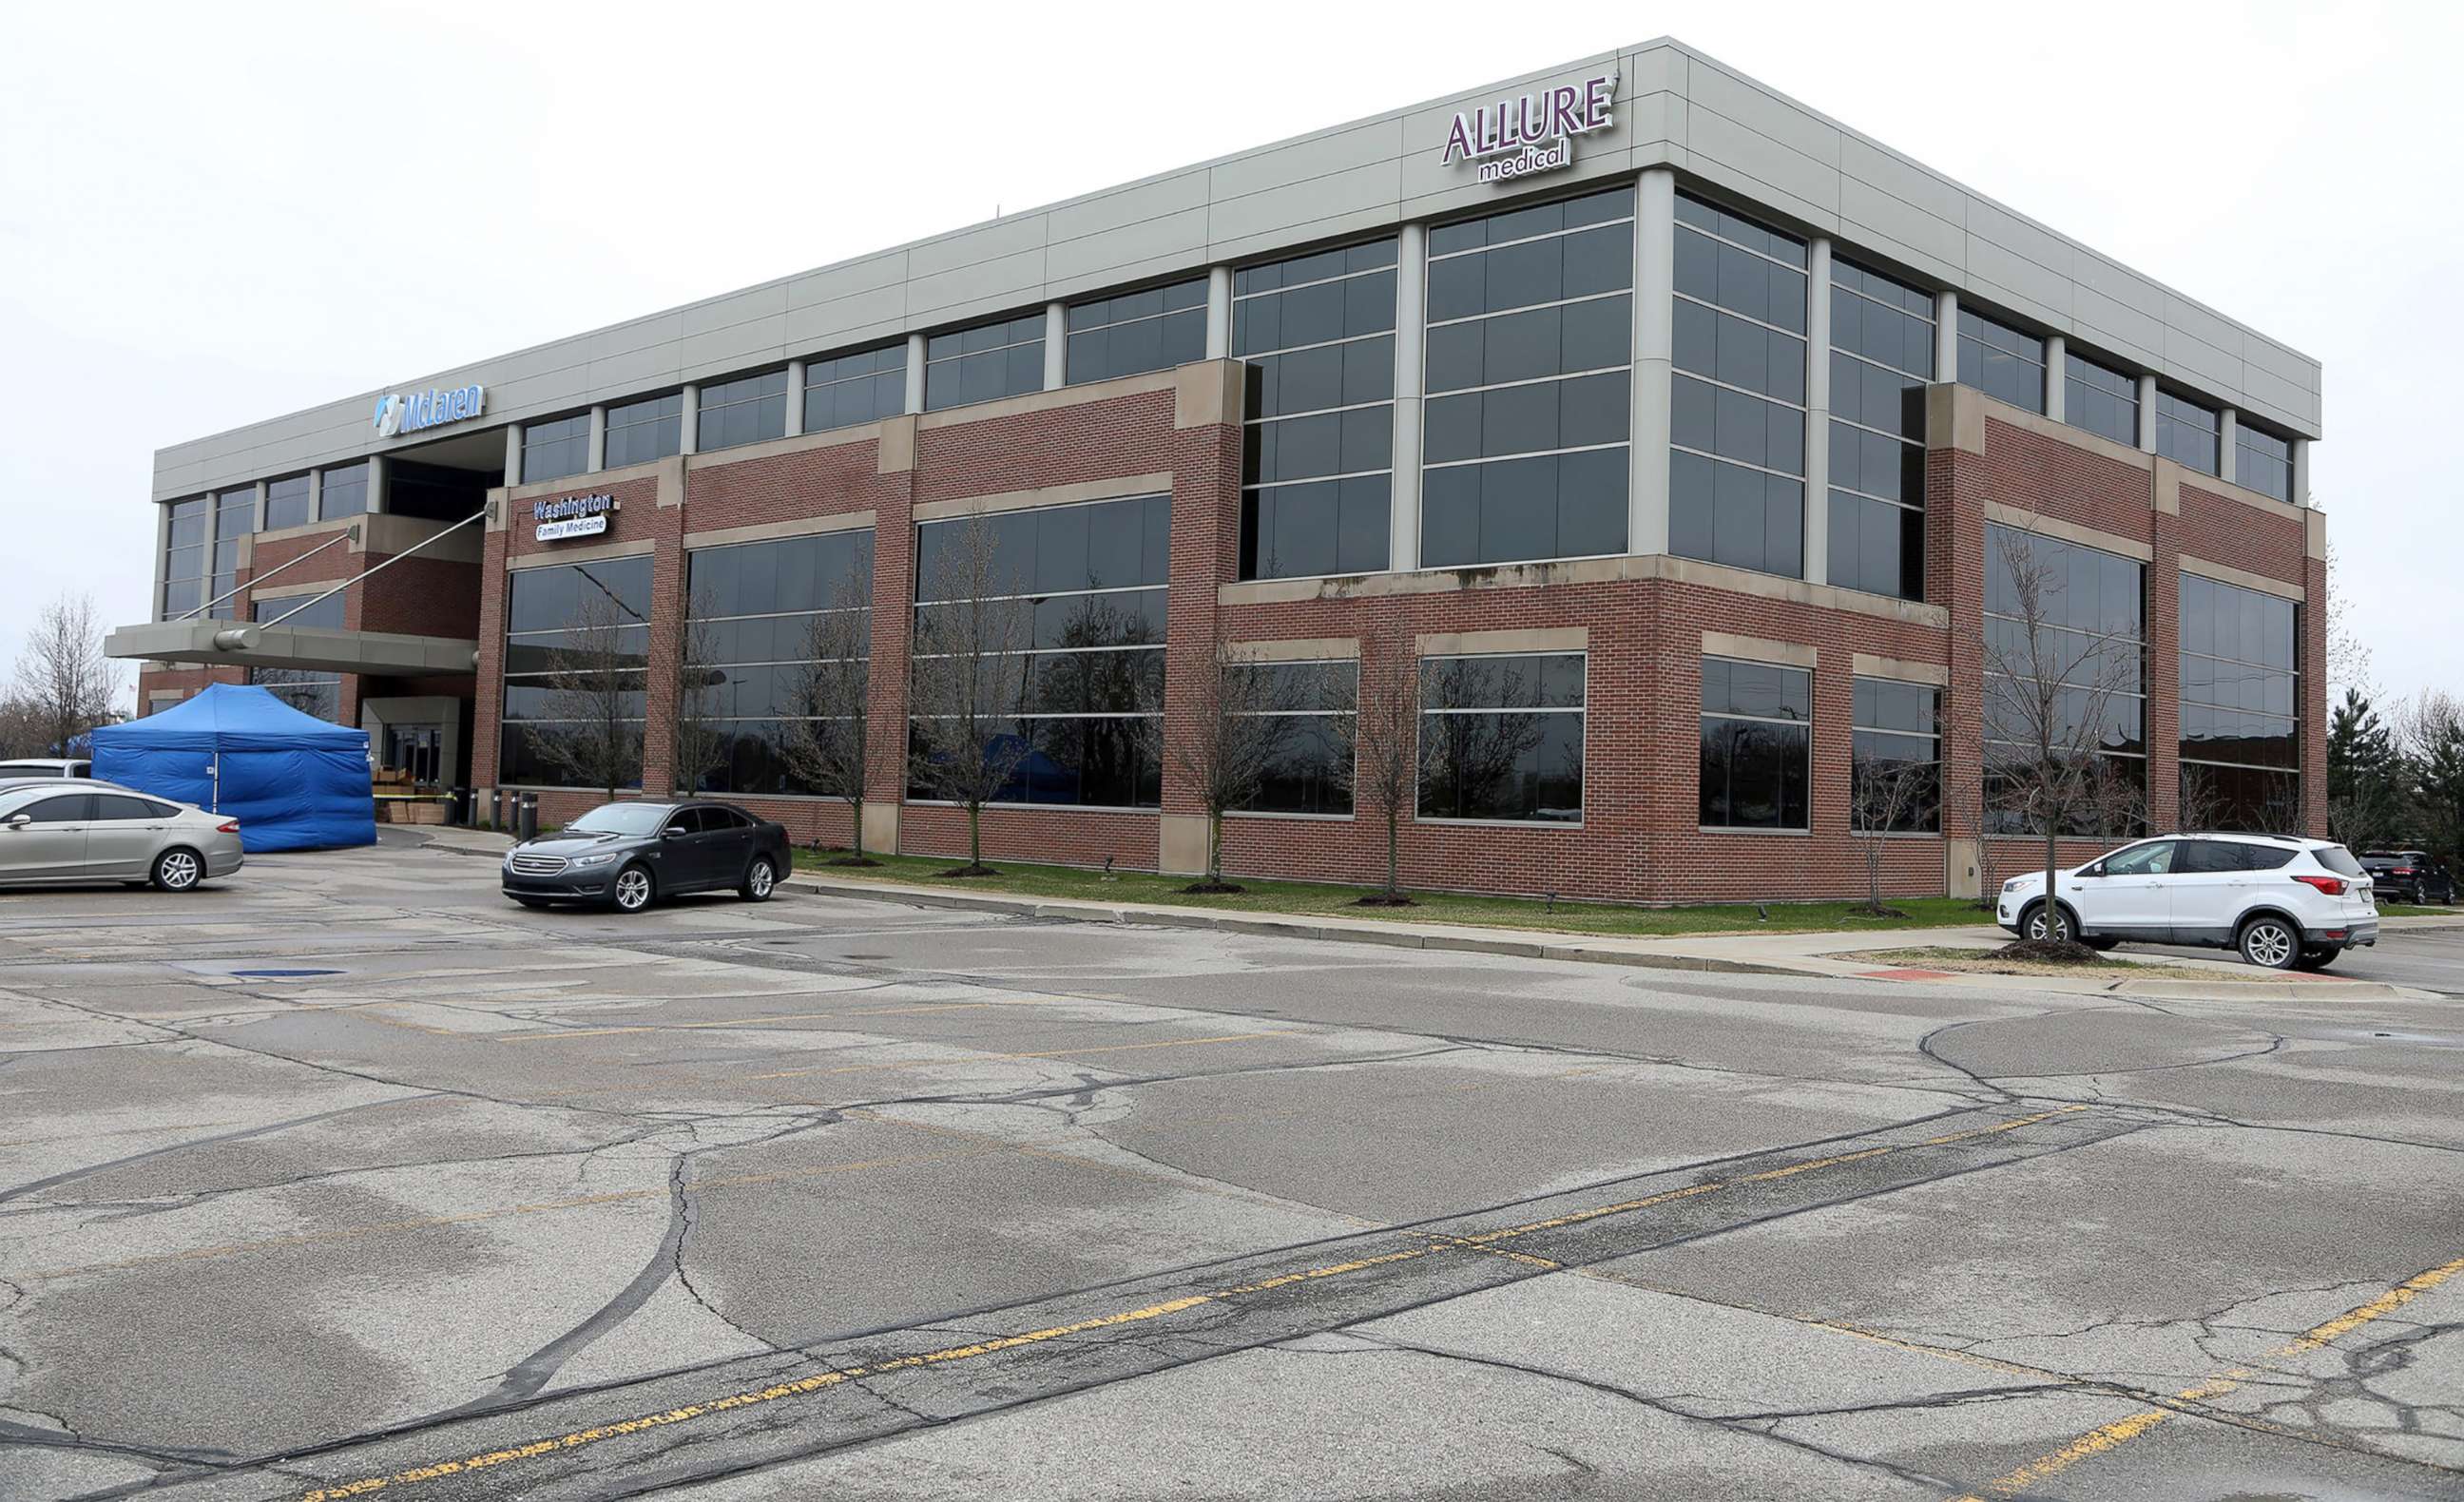 PHOTO: The building housing Allure Medical's office in Shelby Township, Michigan, April 23, 2020. The Federal Bureau of Investigations raided Allure Medical for an alleged "federal violation."